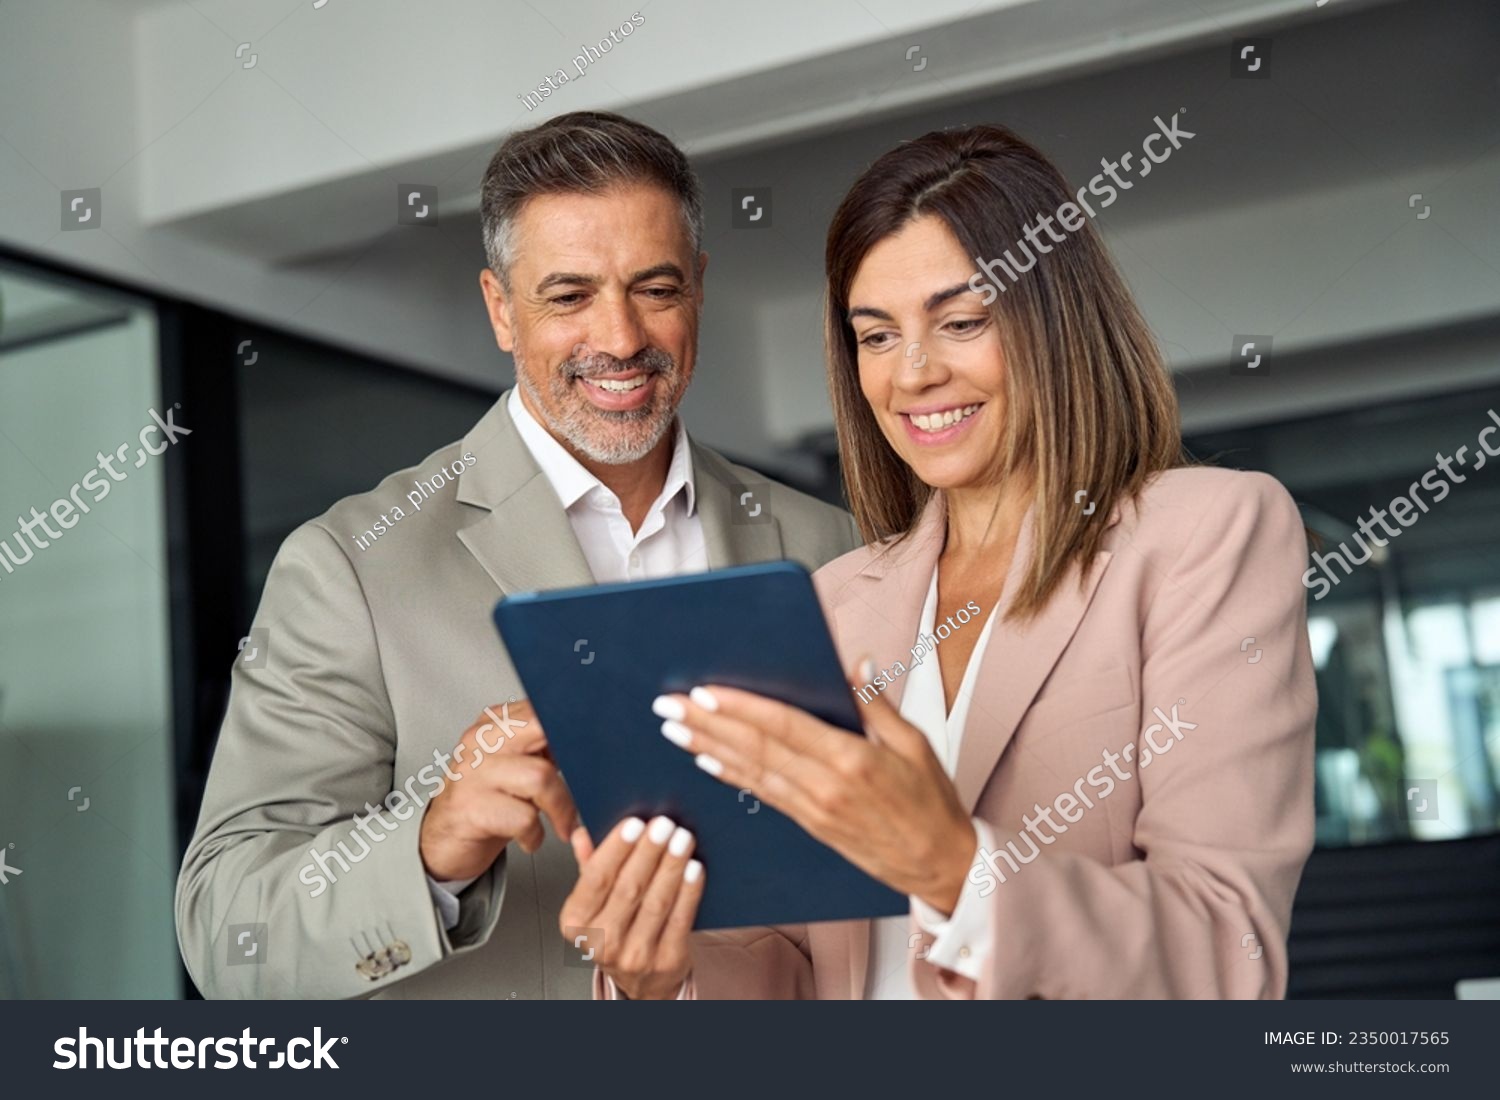 Smiling busy middle aged business man and business woman professional corporate executive leaders wearing suits discussing digital strategy using tablet computer standing in office working together. #2350017565